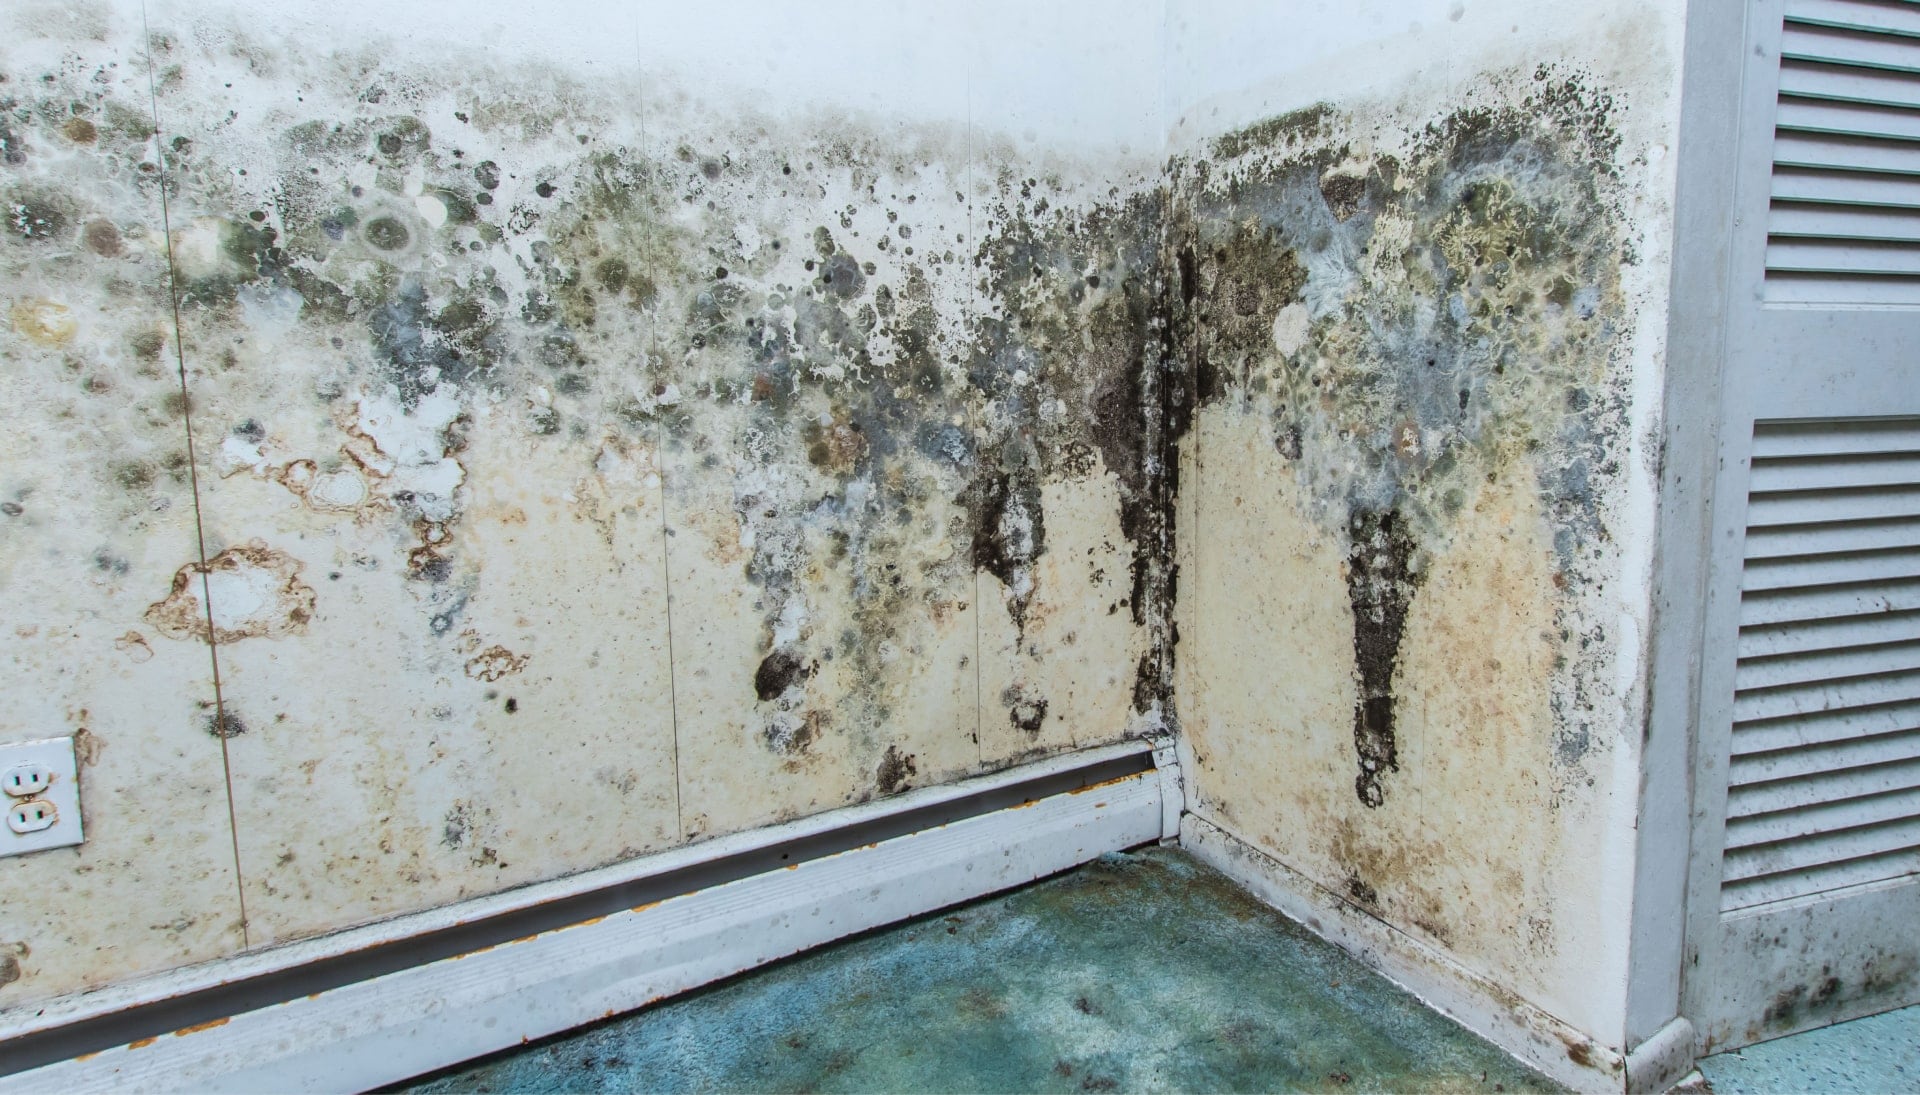 Mold-Damager-Odor-Control in Katy